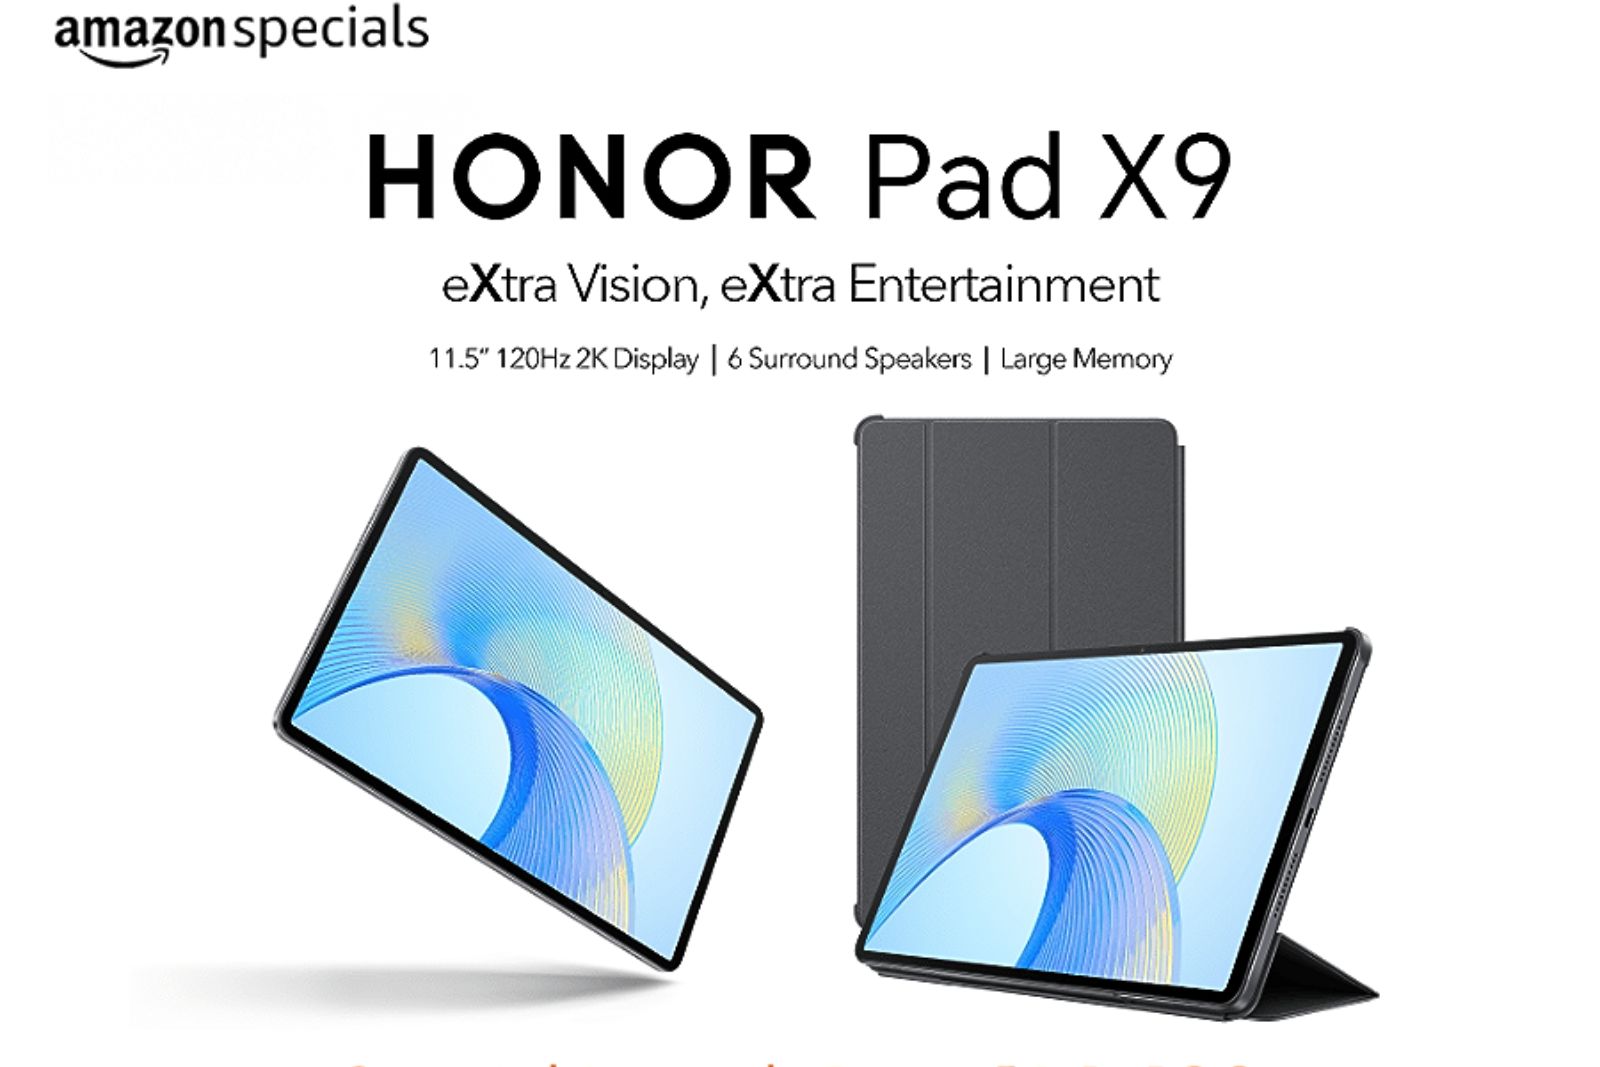 HONOR introduced the latest Pad X9 entry-level tablet